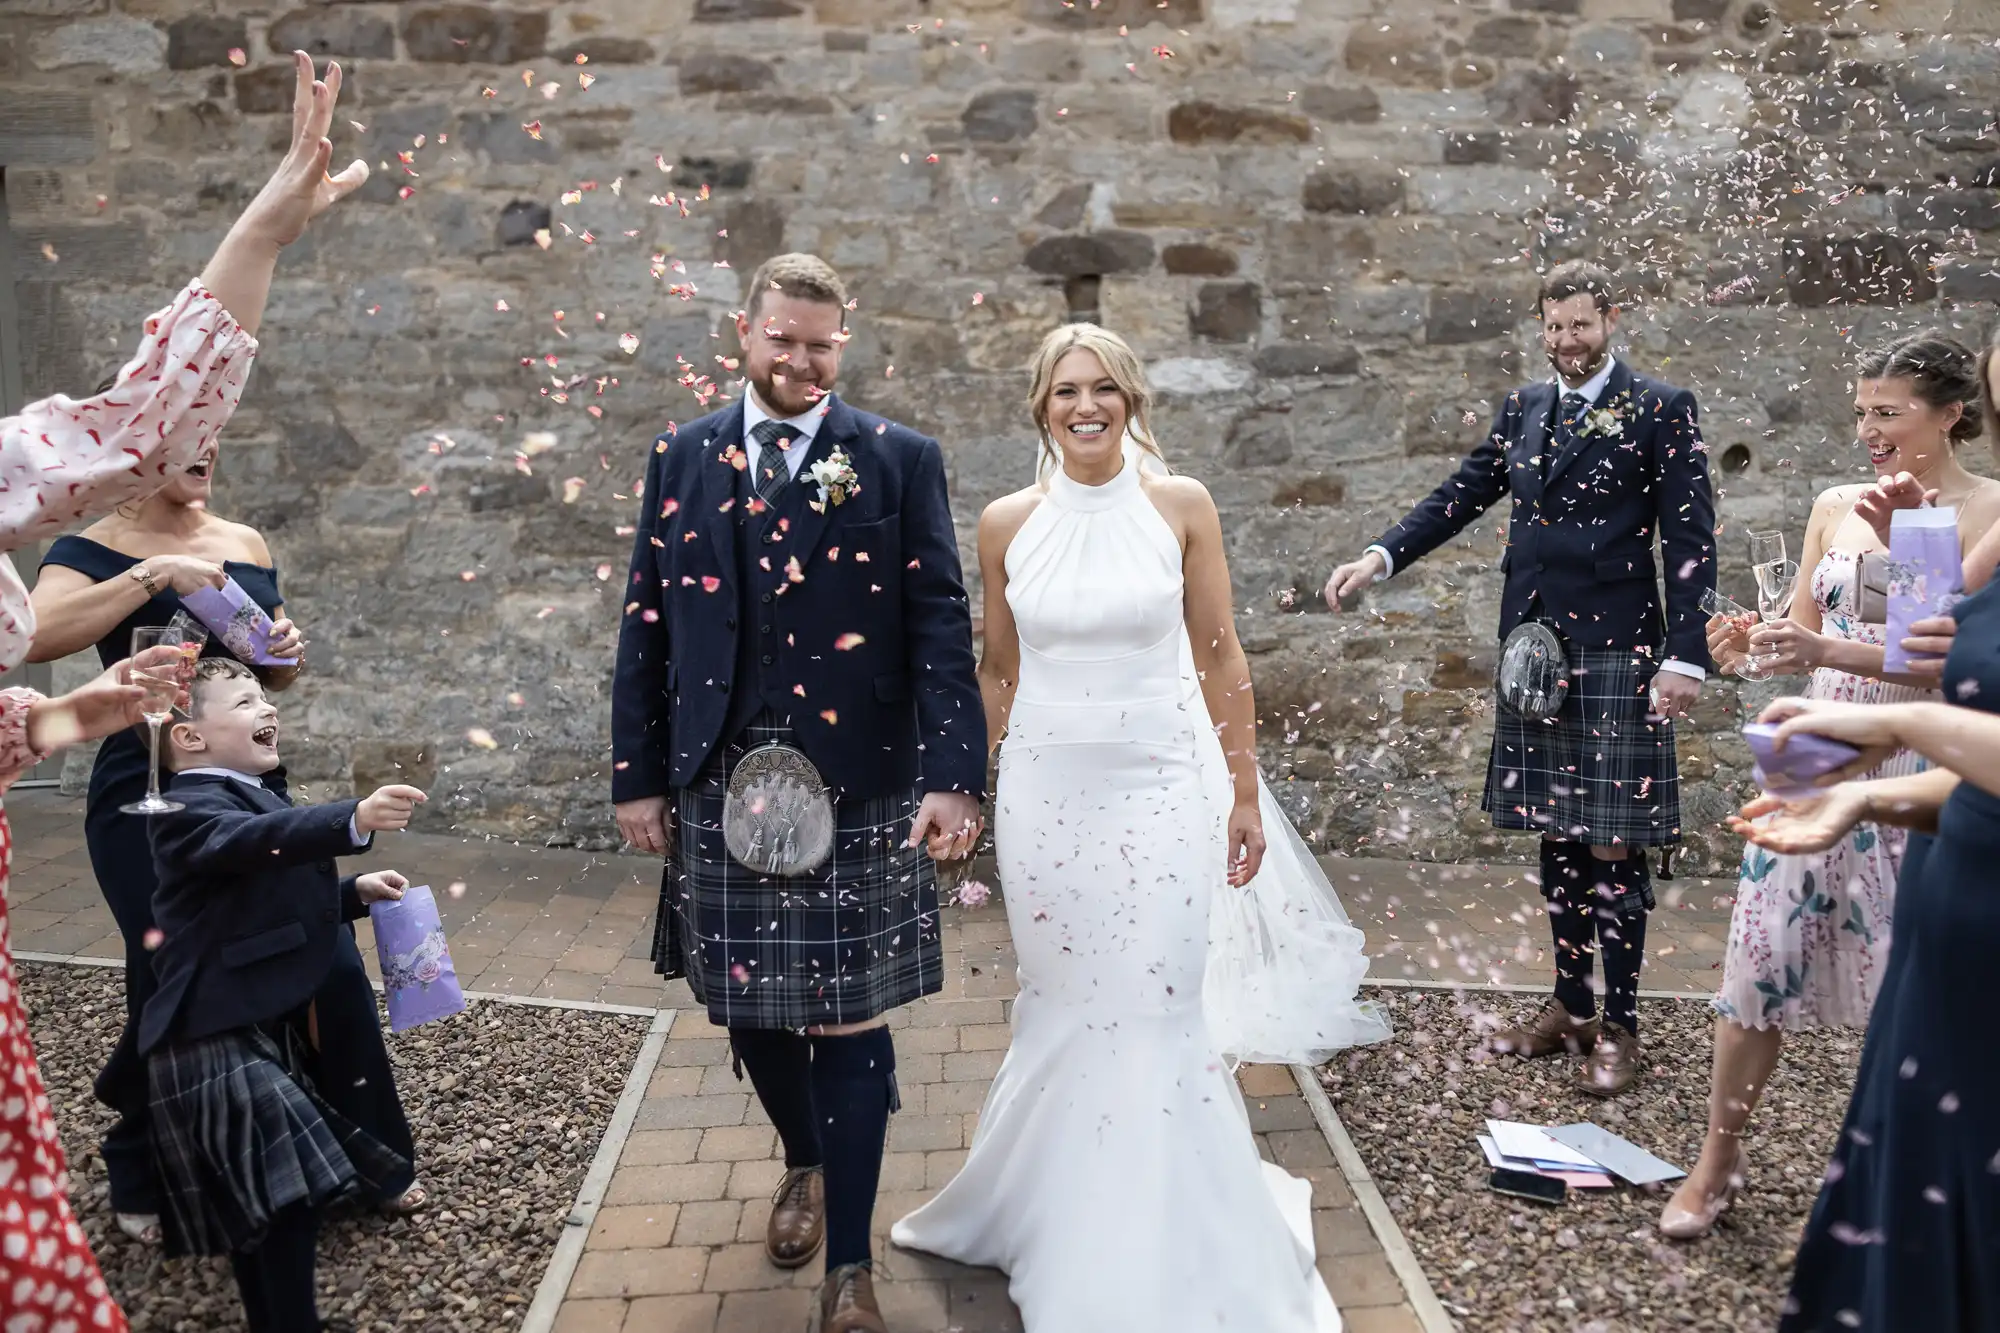 A newlywed couple walks through a shower of confetti, smiling, surrounded by guests and a child joyfully throwing confetti in an old stone courtyard.